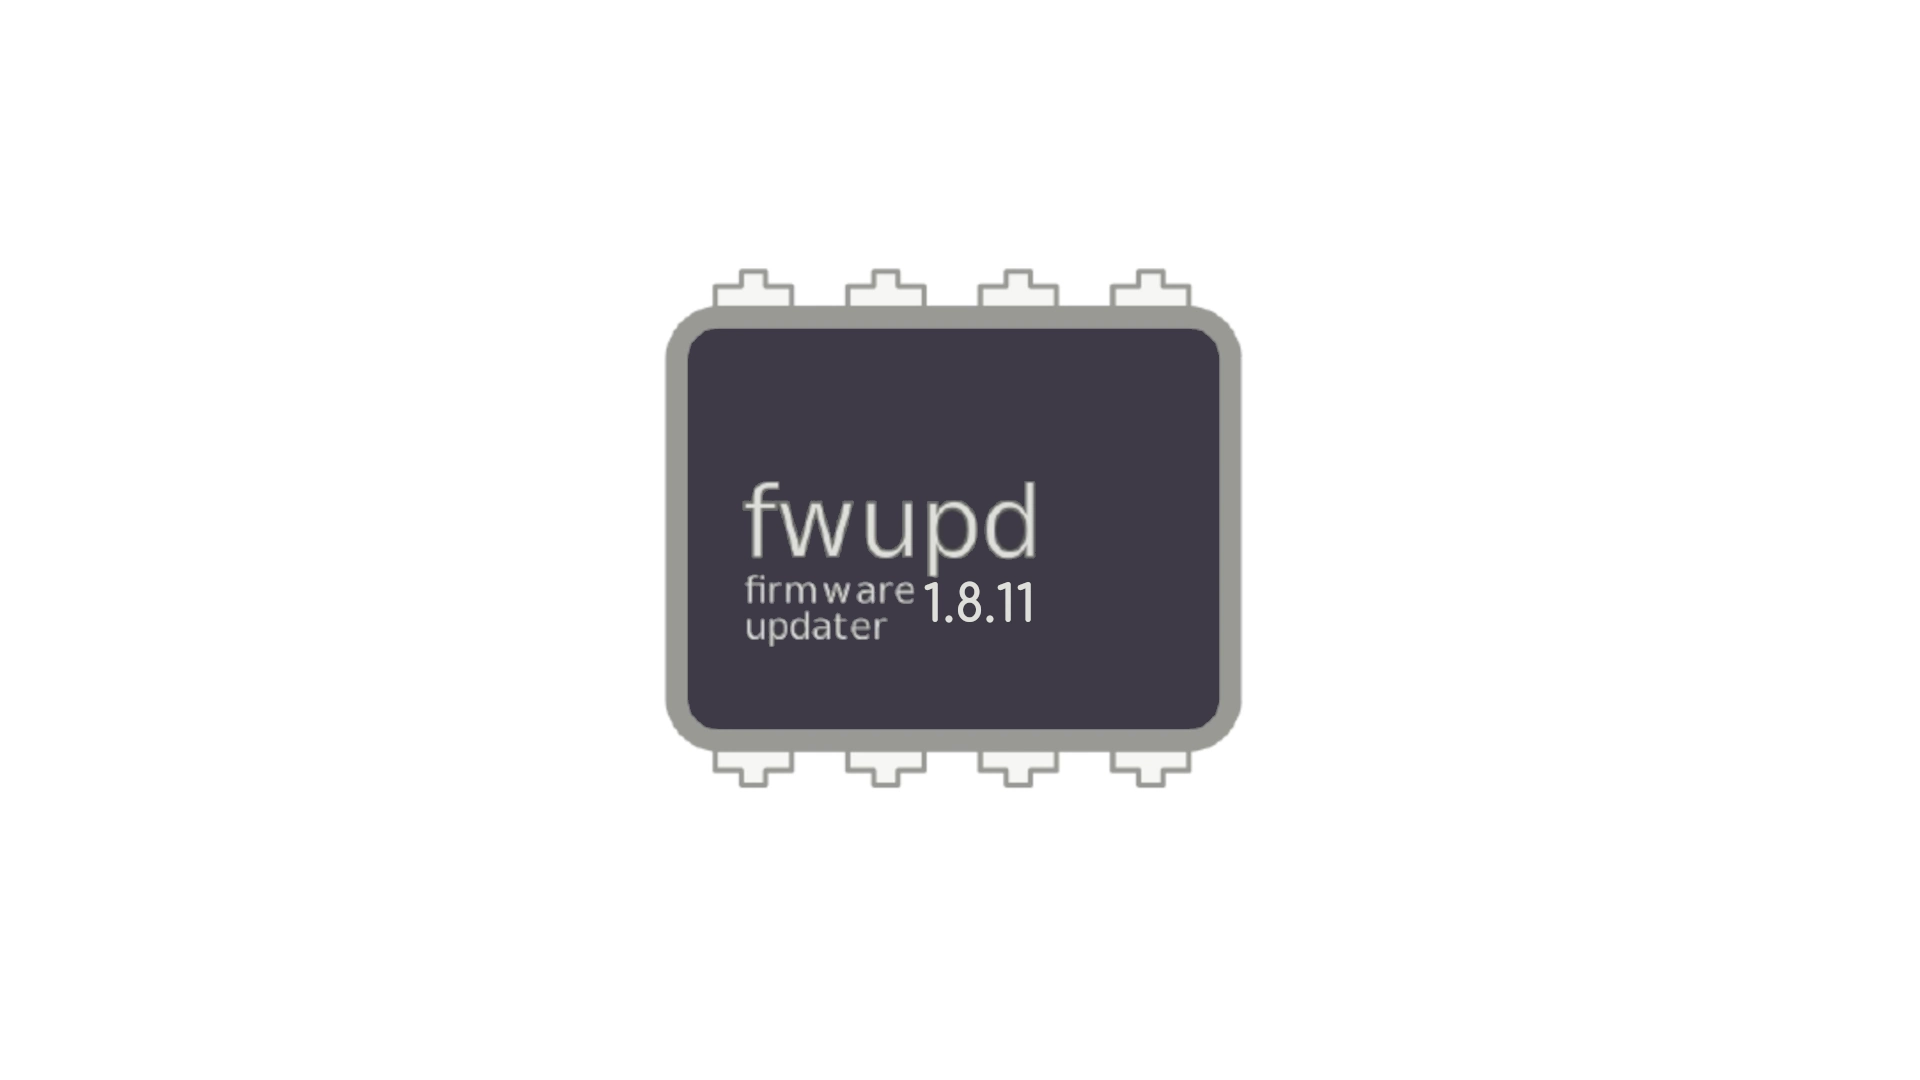 Fwupd 1.8.11 Linux Firmware Updater Adds Support for New Devices, New Features